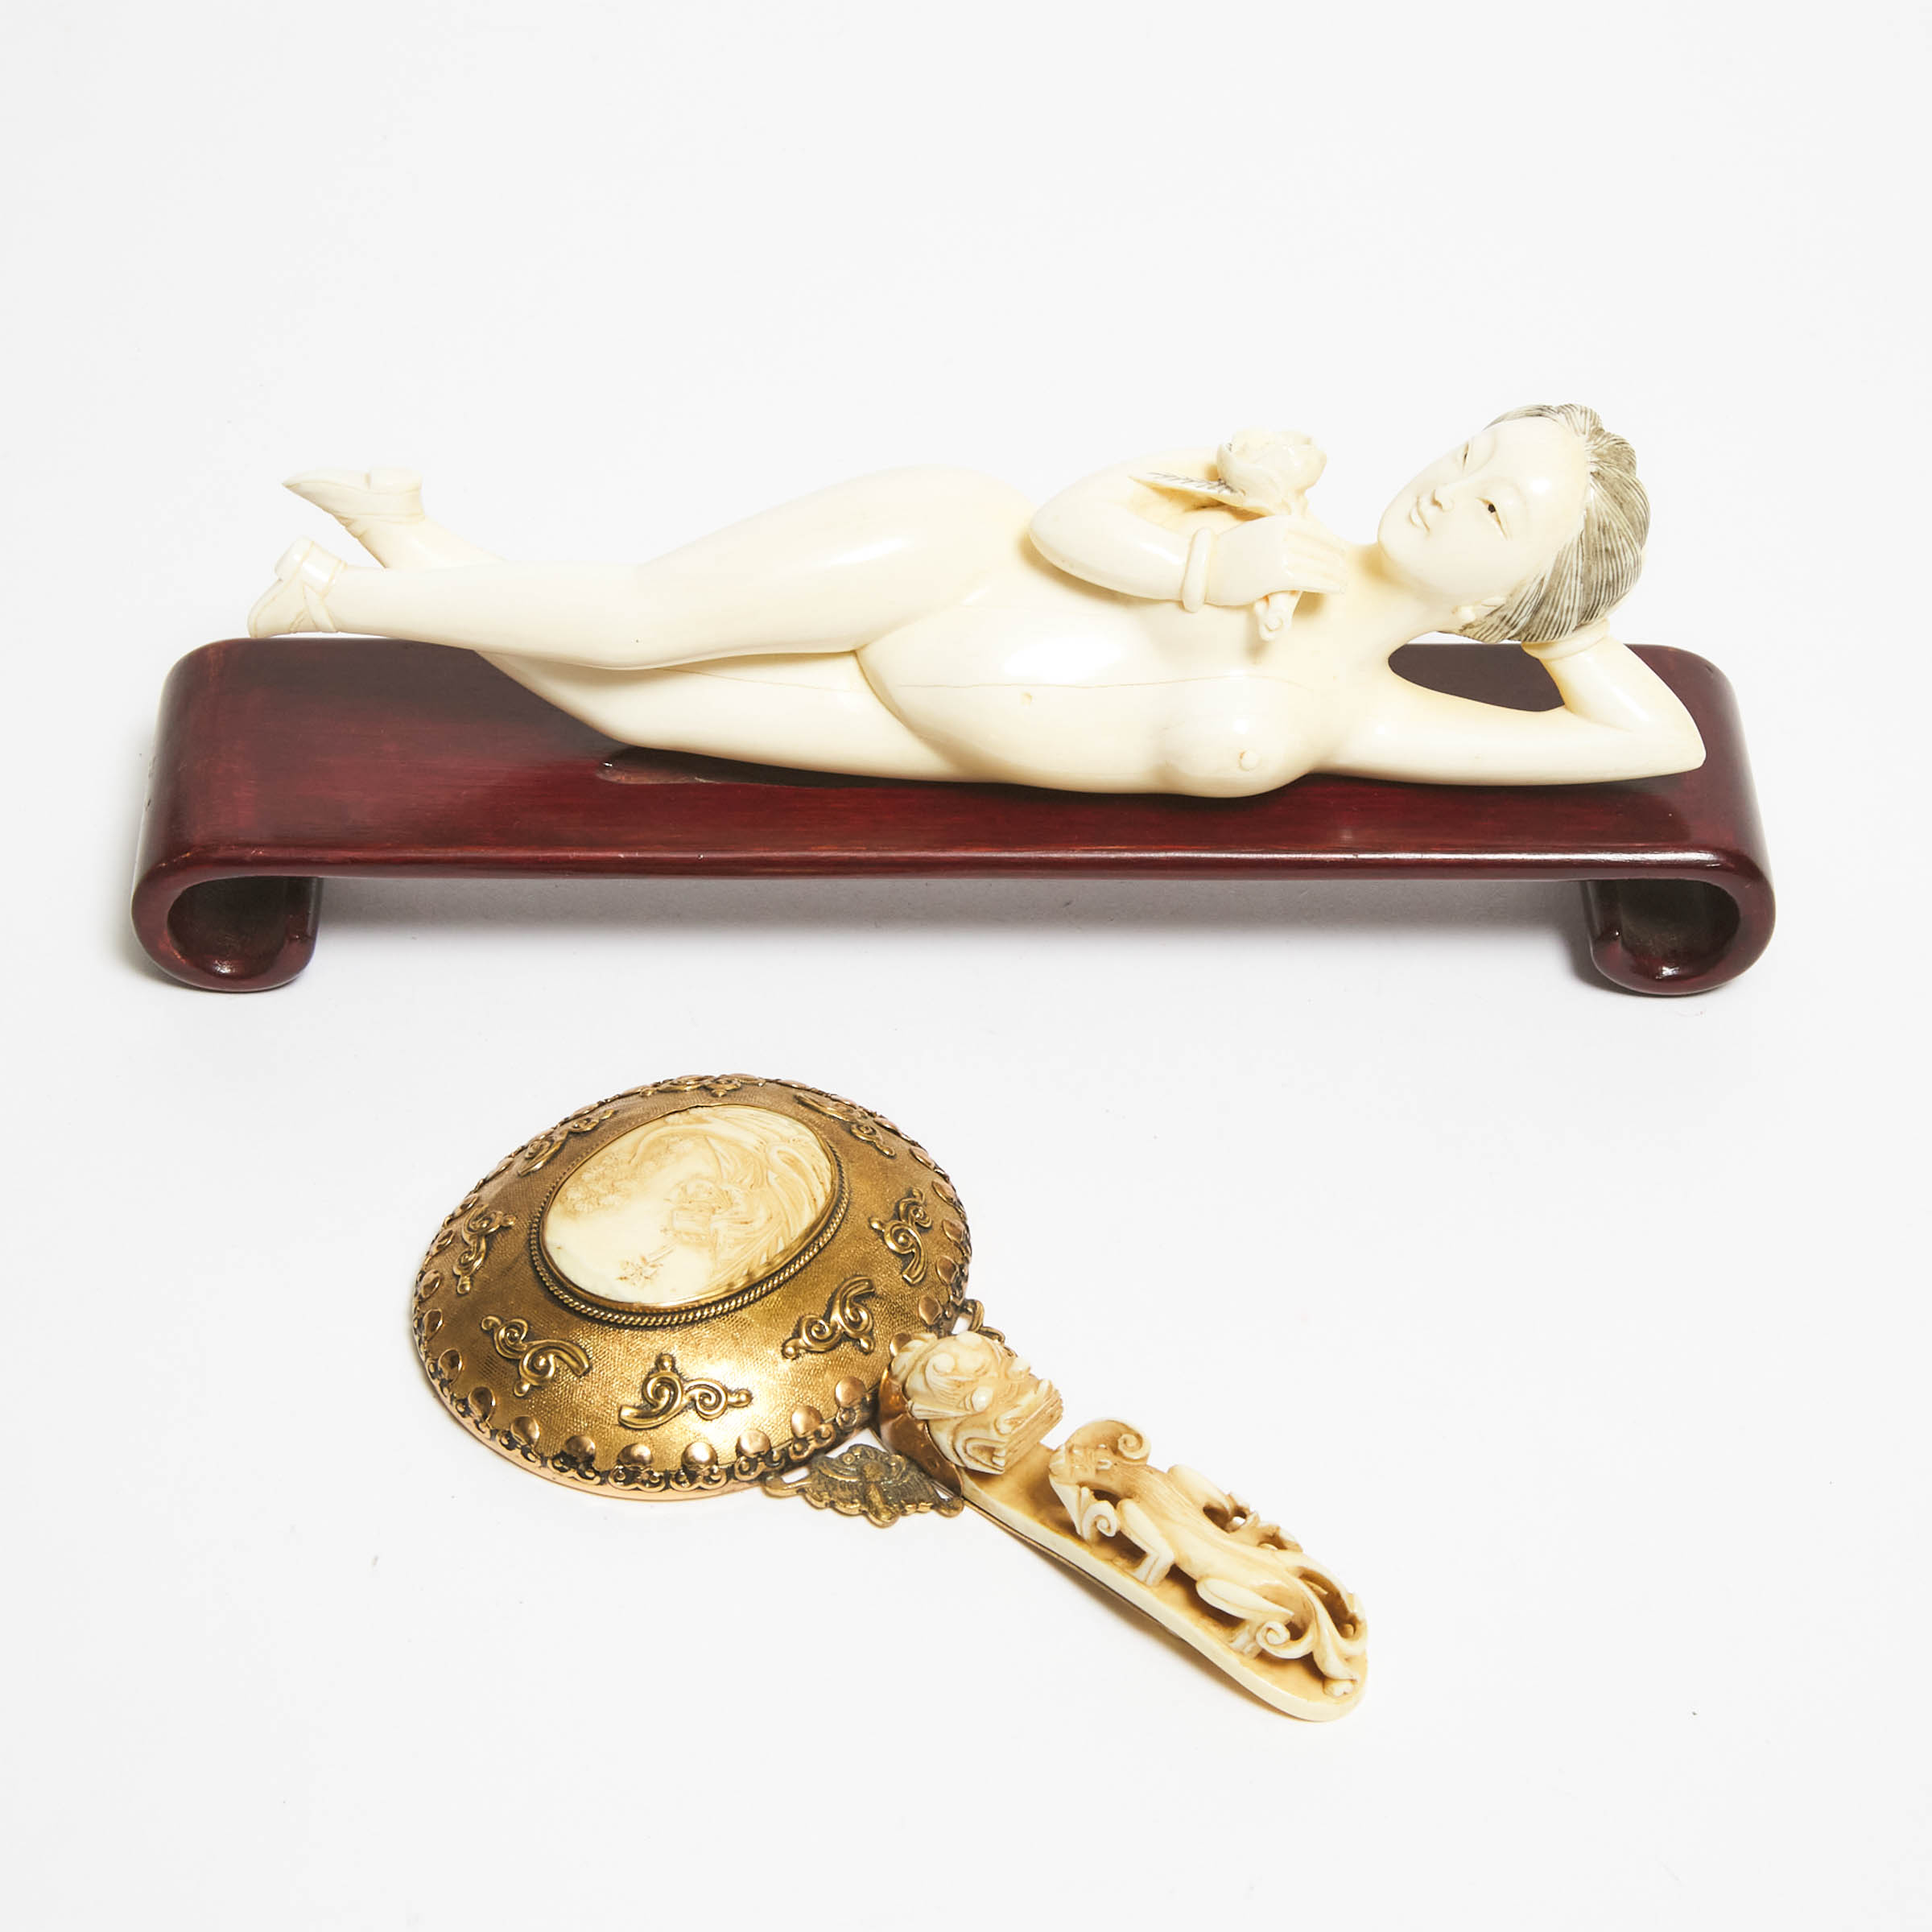 An Ivory Belt Hook Mounted Mirror, Together With a 'Doctor's Doll', Qing Dynasty